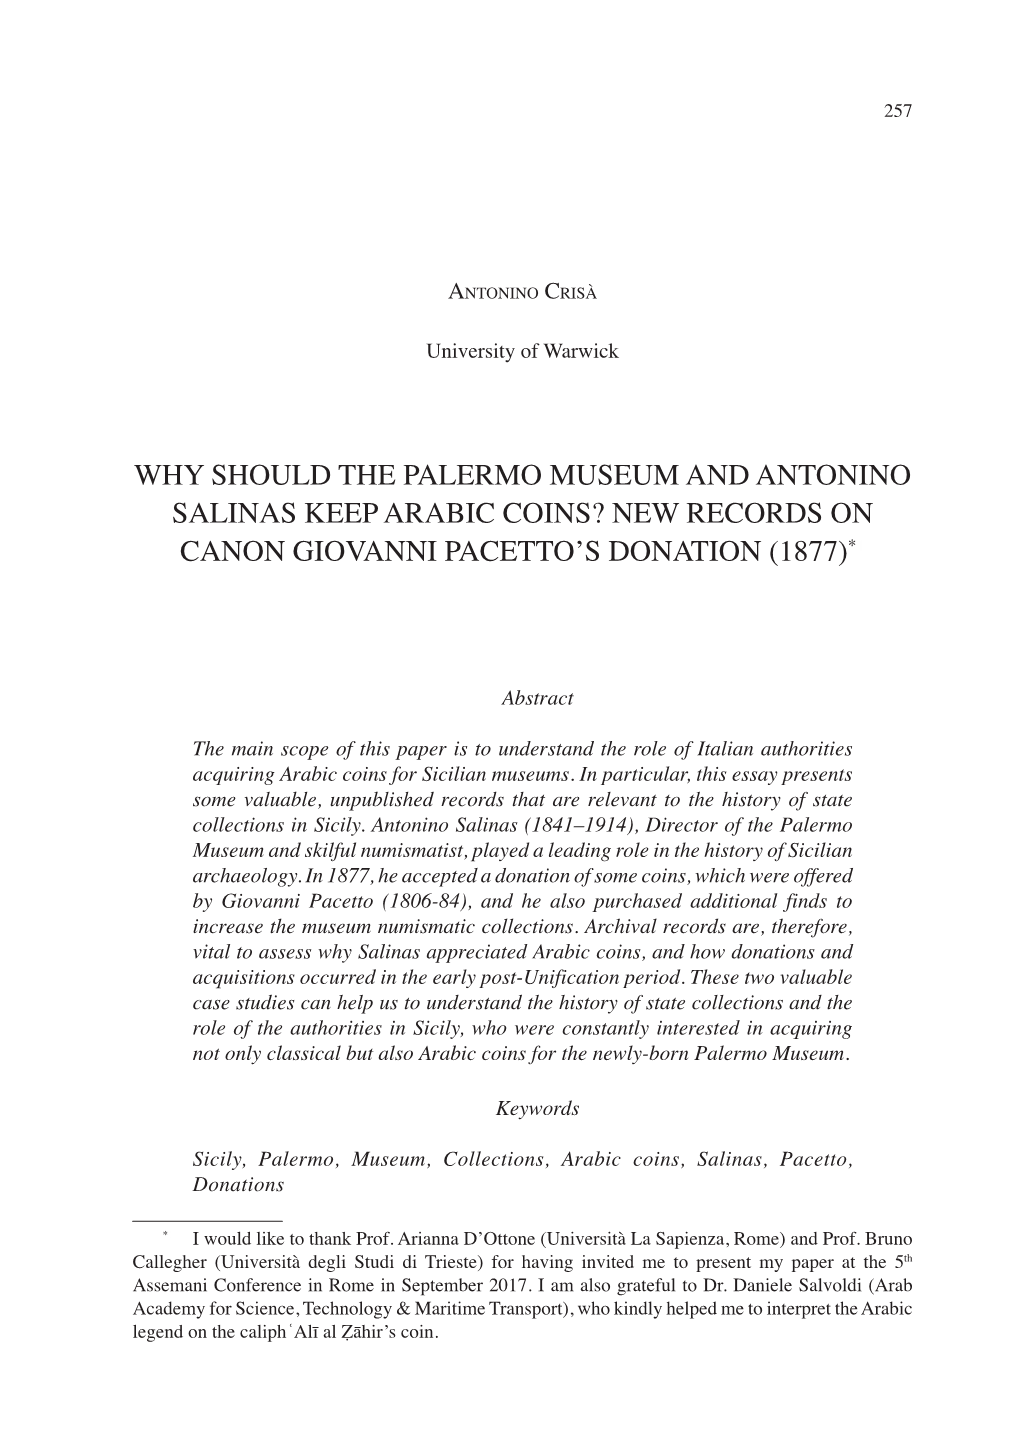 Why Should the Palermo Museum and Antonino Salinas Keep Arabic Coins? New Records on Canon Giovanni Pacetto’S Donation (1877)*1